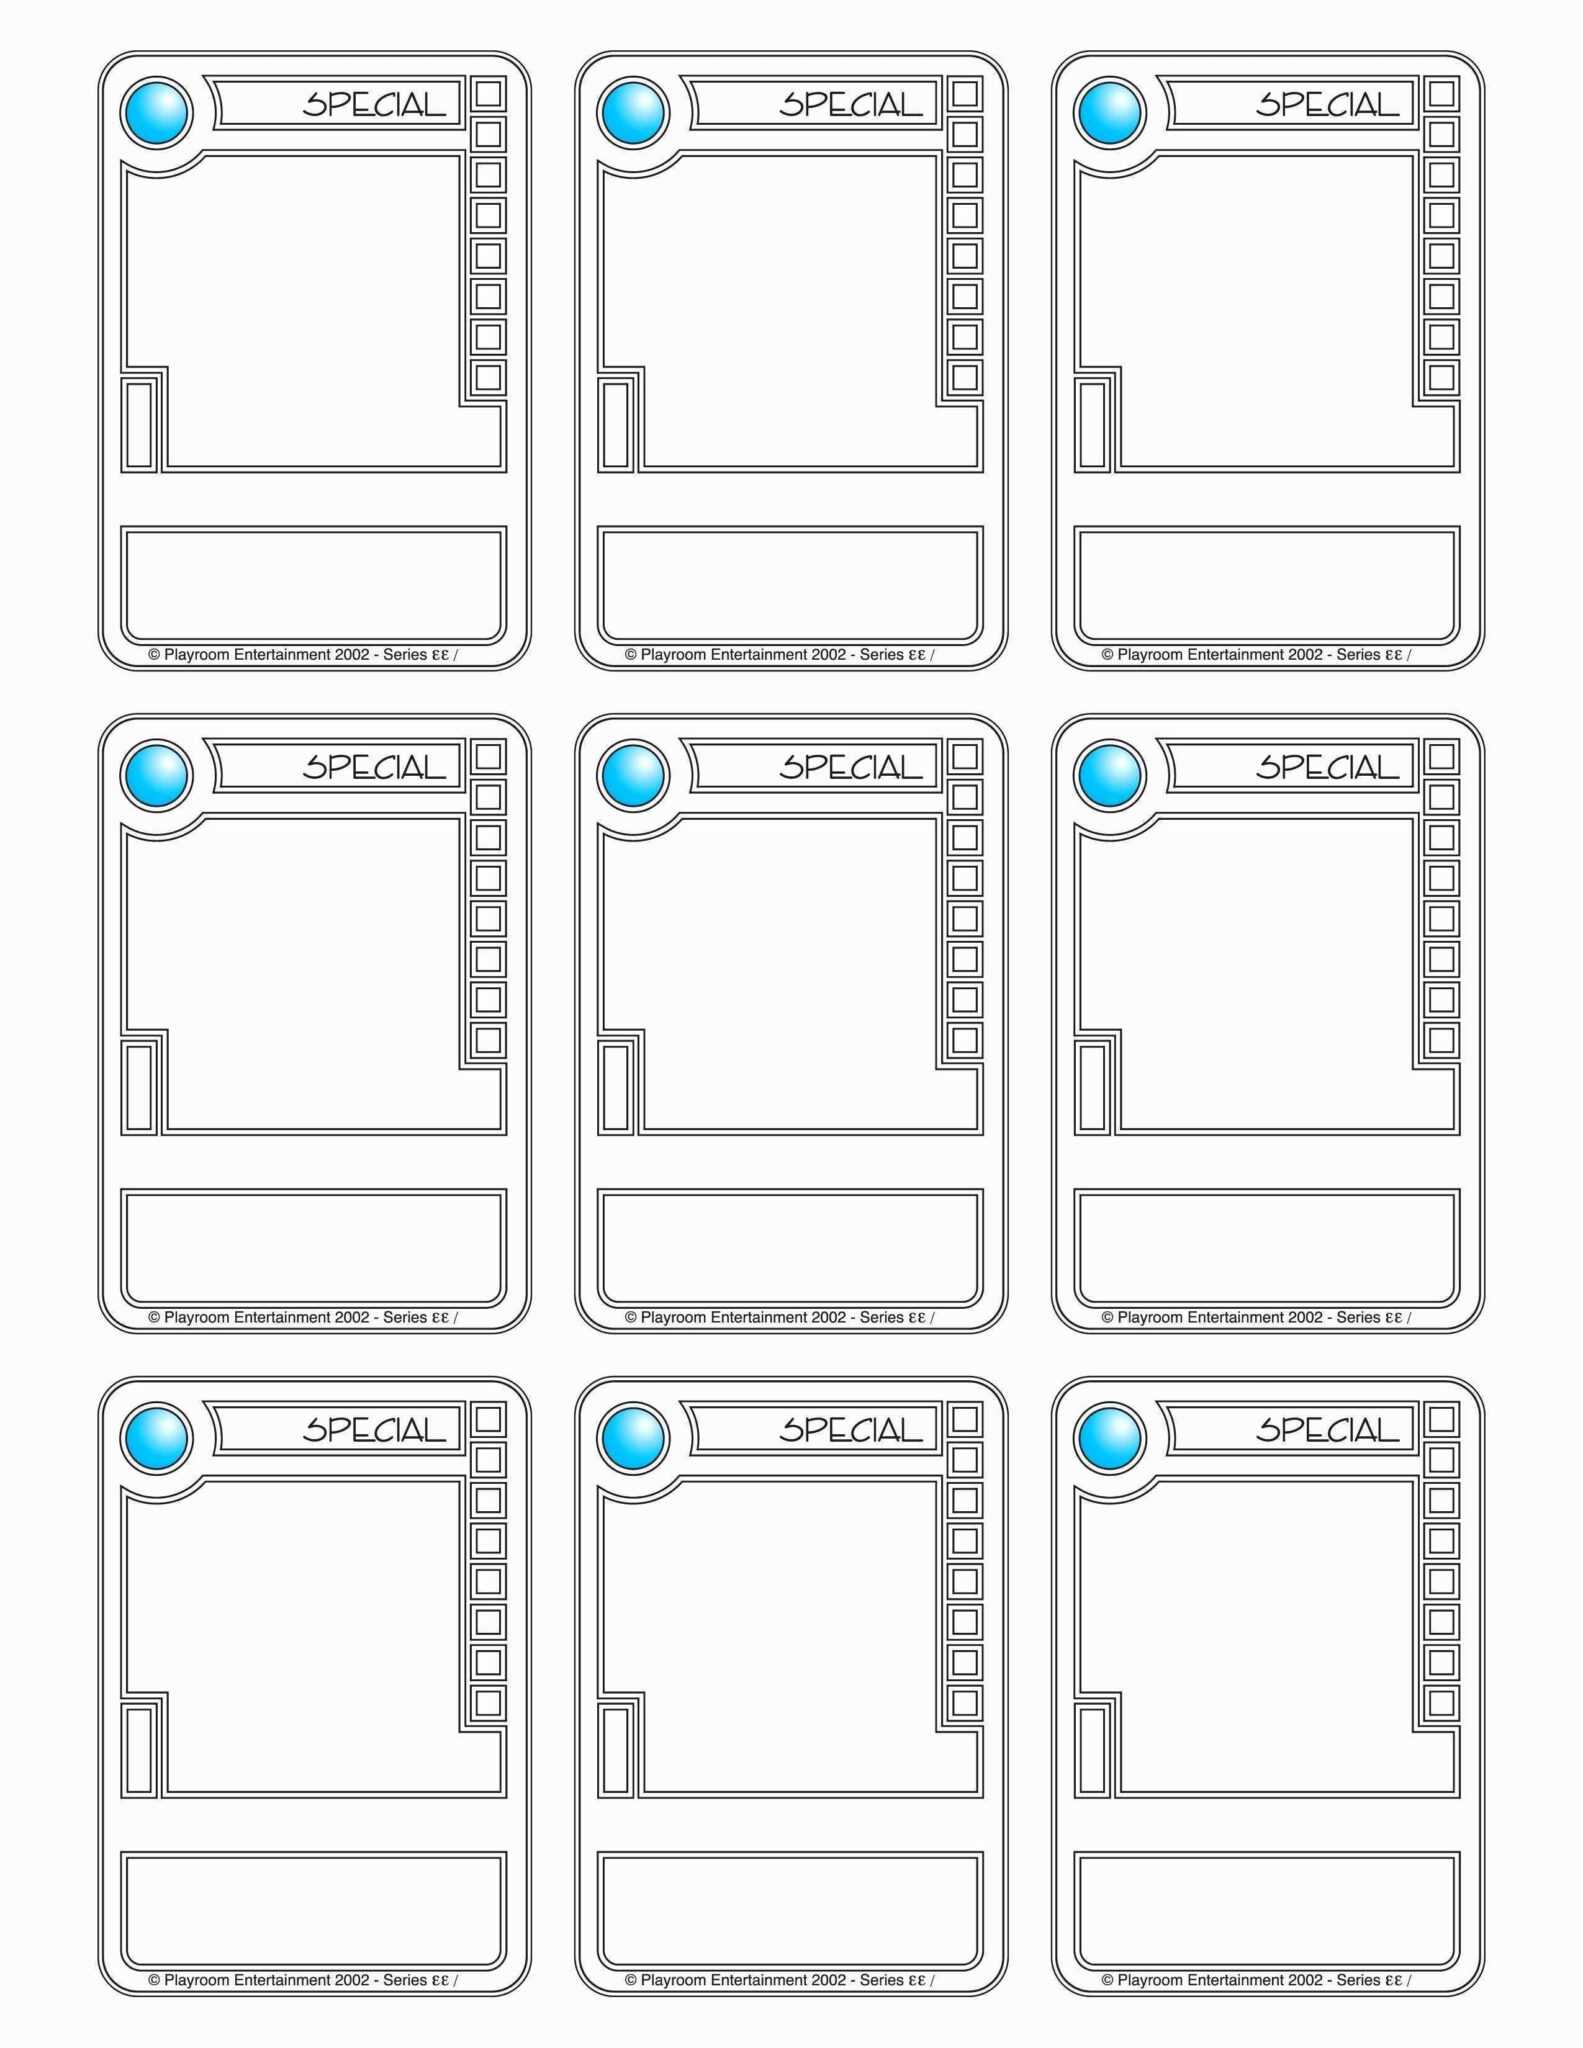 001 Trading Card Maker Free Examples Template For Success In With Card